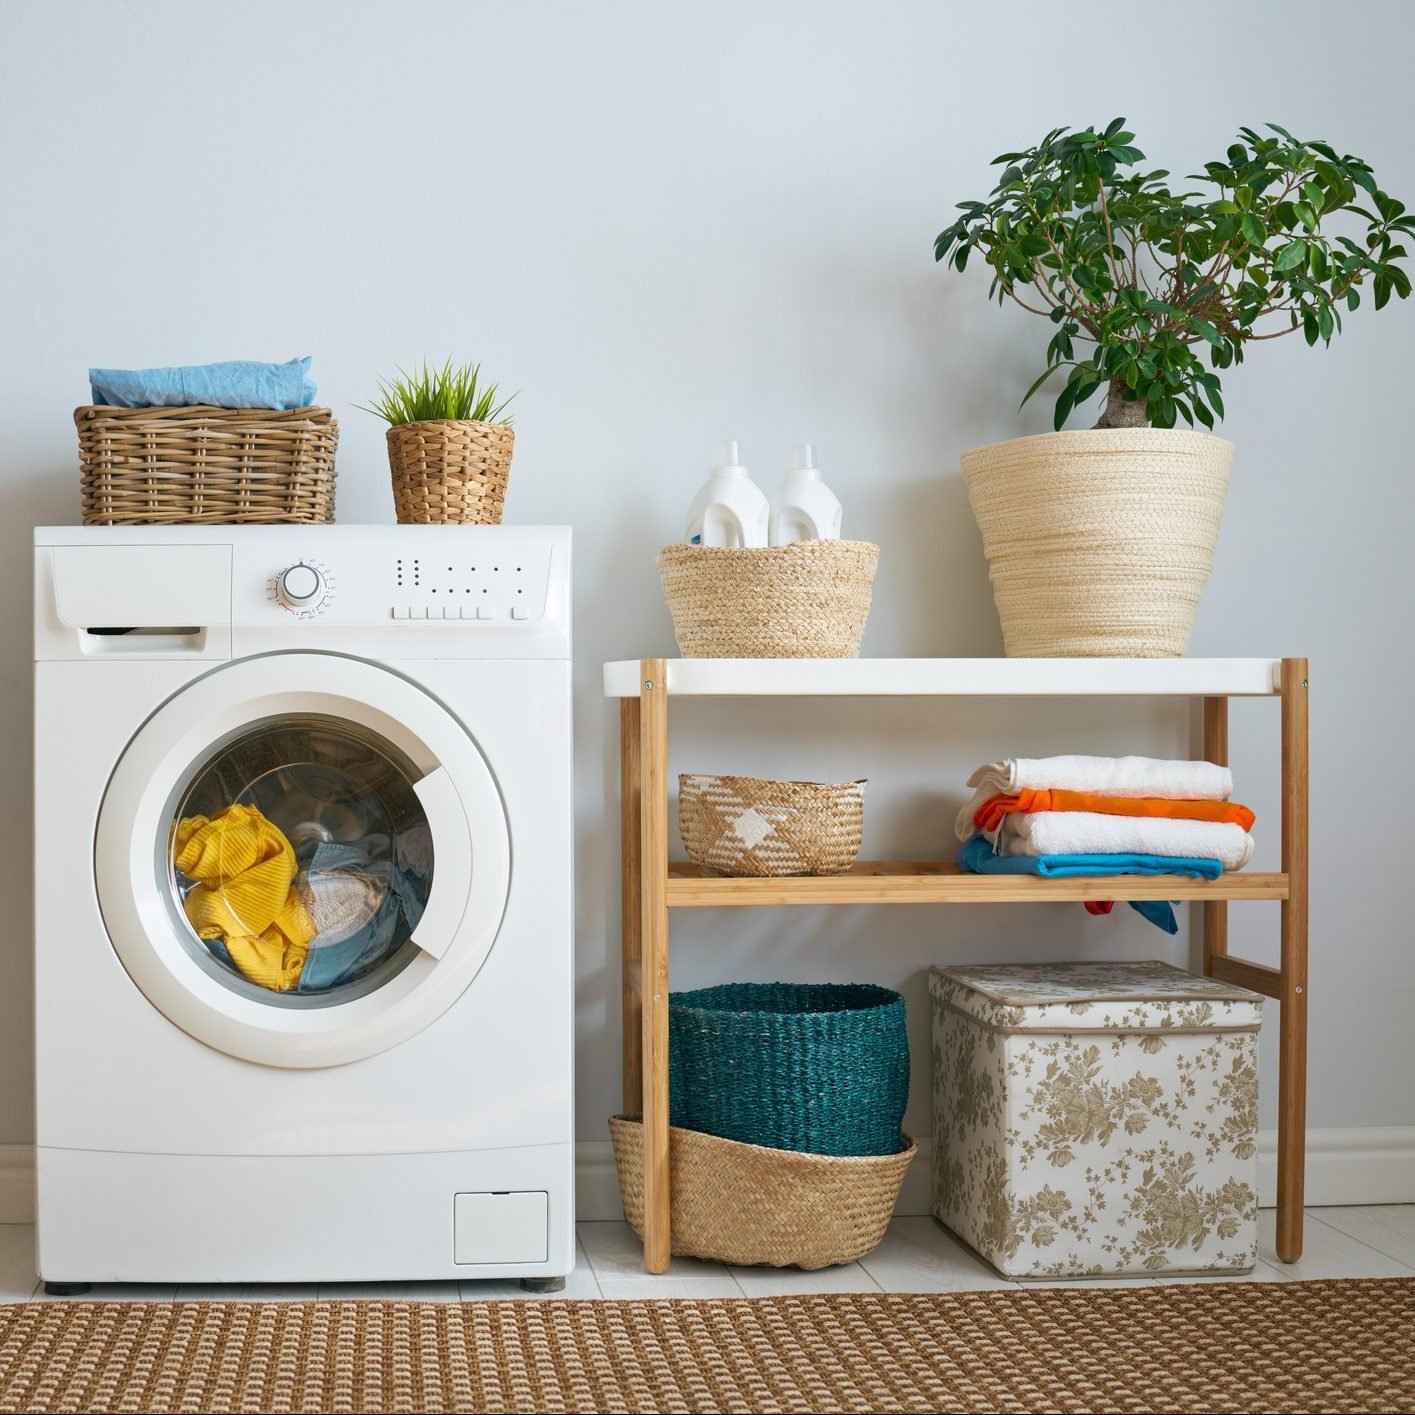 21 Top Rated Laundry Products on Amazon | The Family Handyman